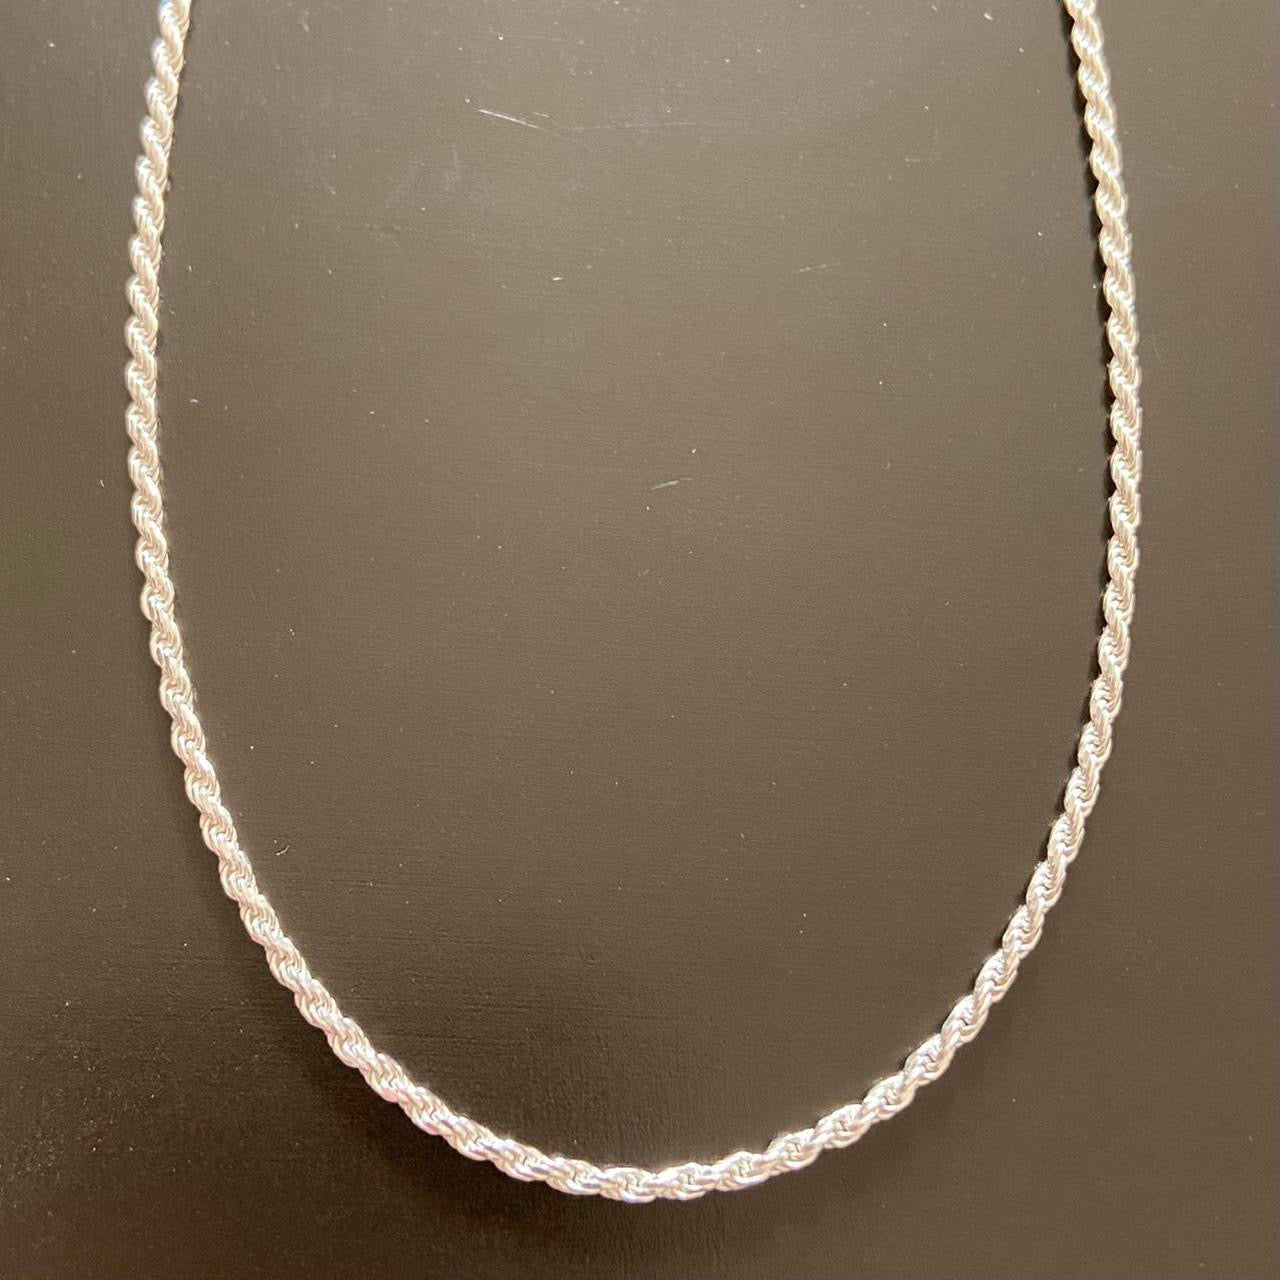 Solid Silver Rope Chain 20in 2mm